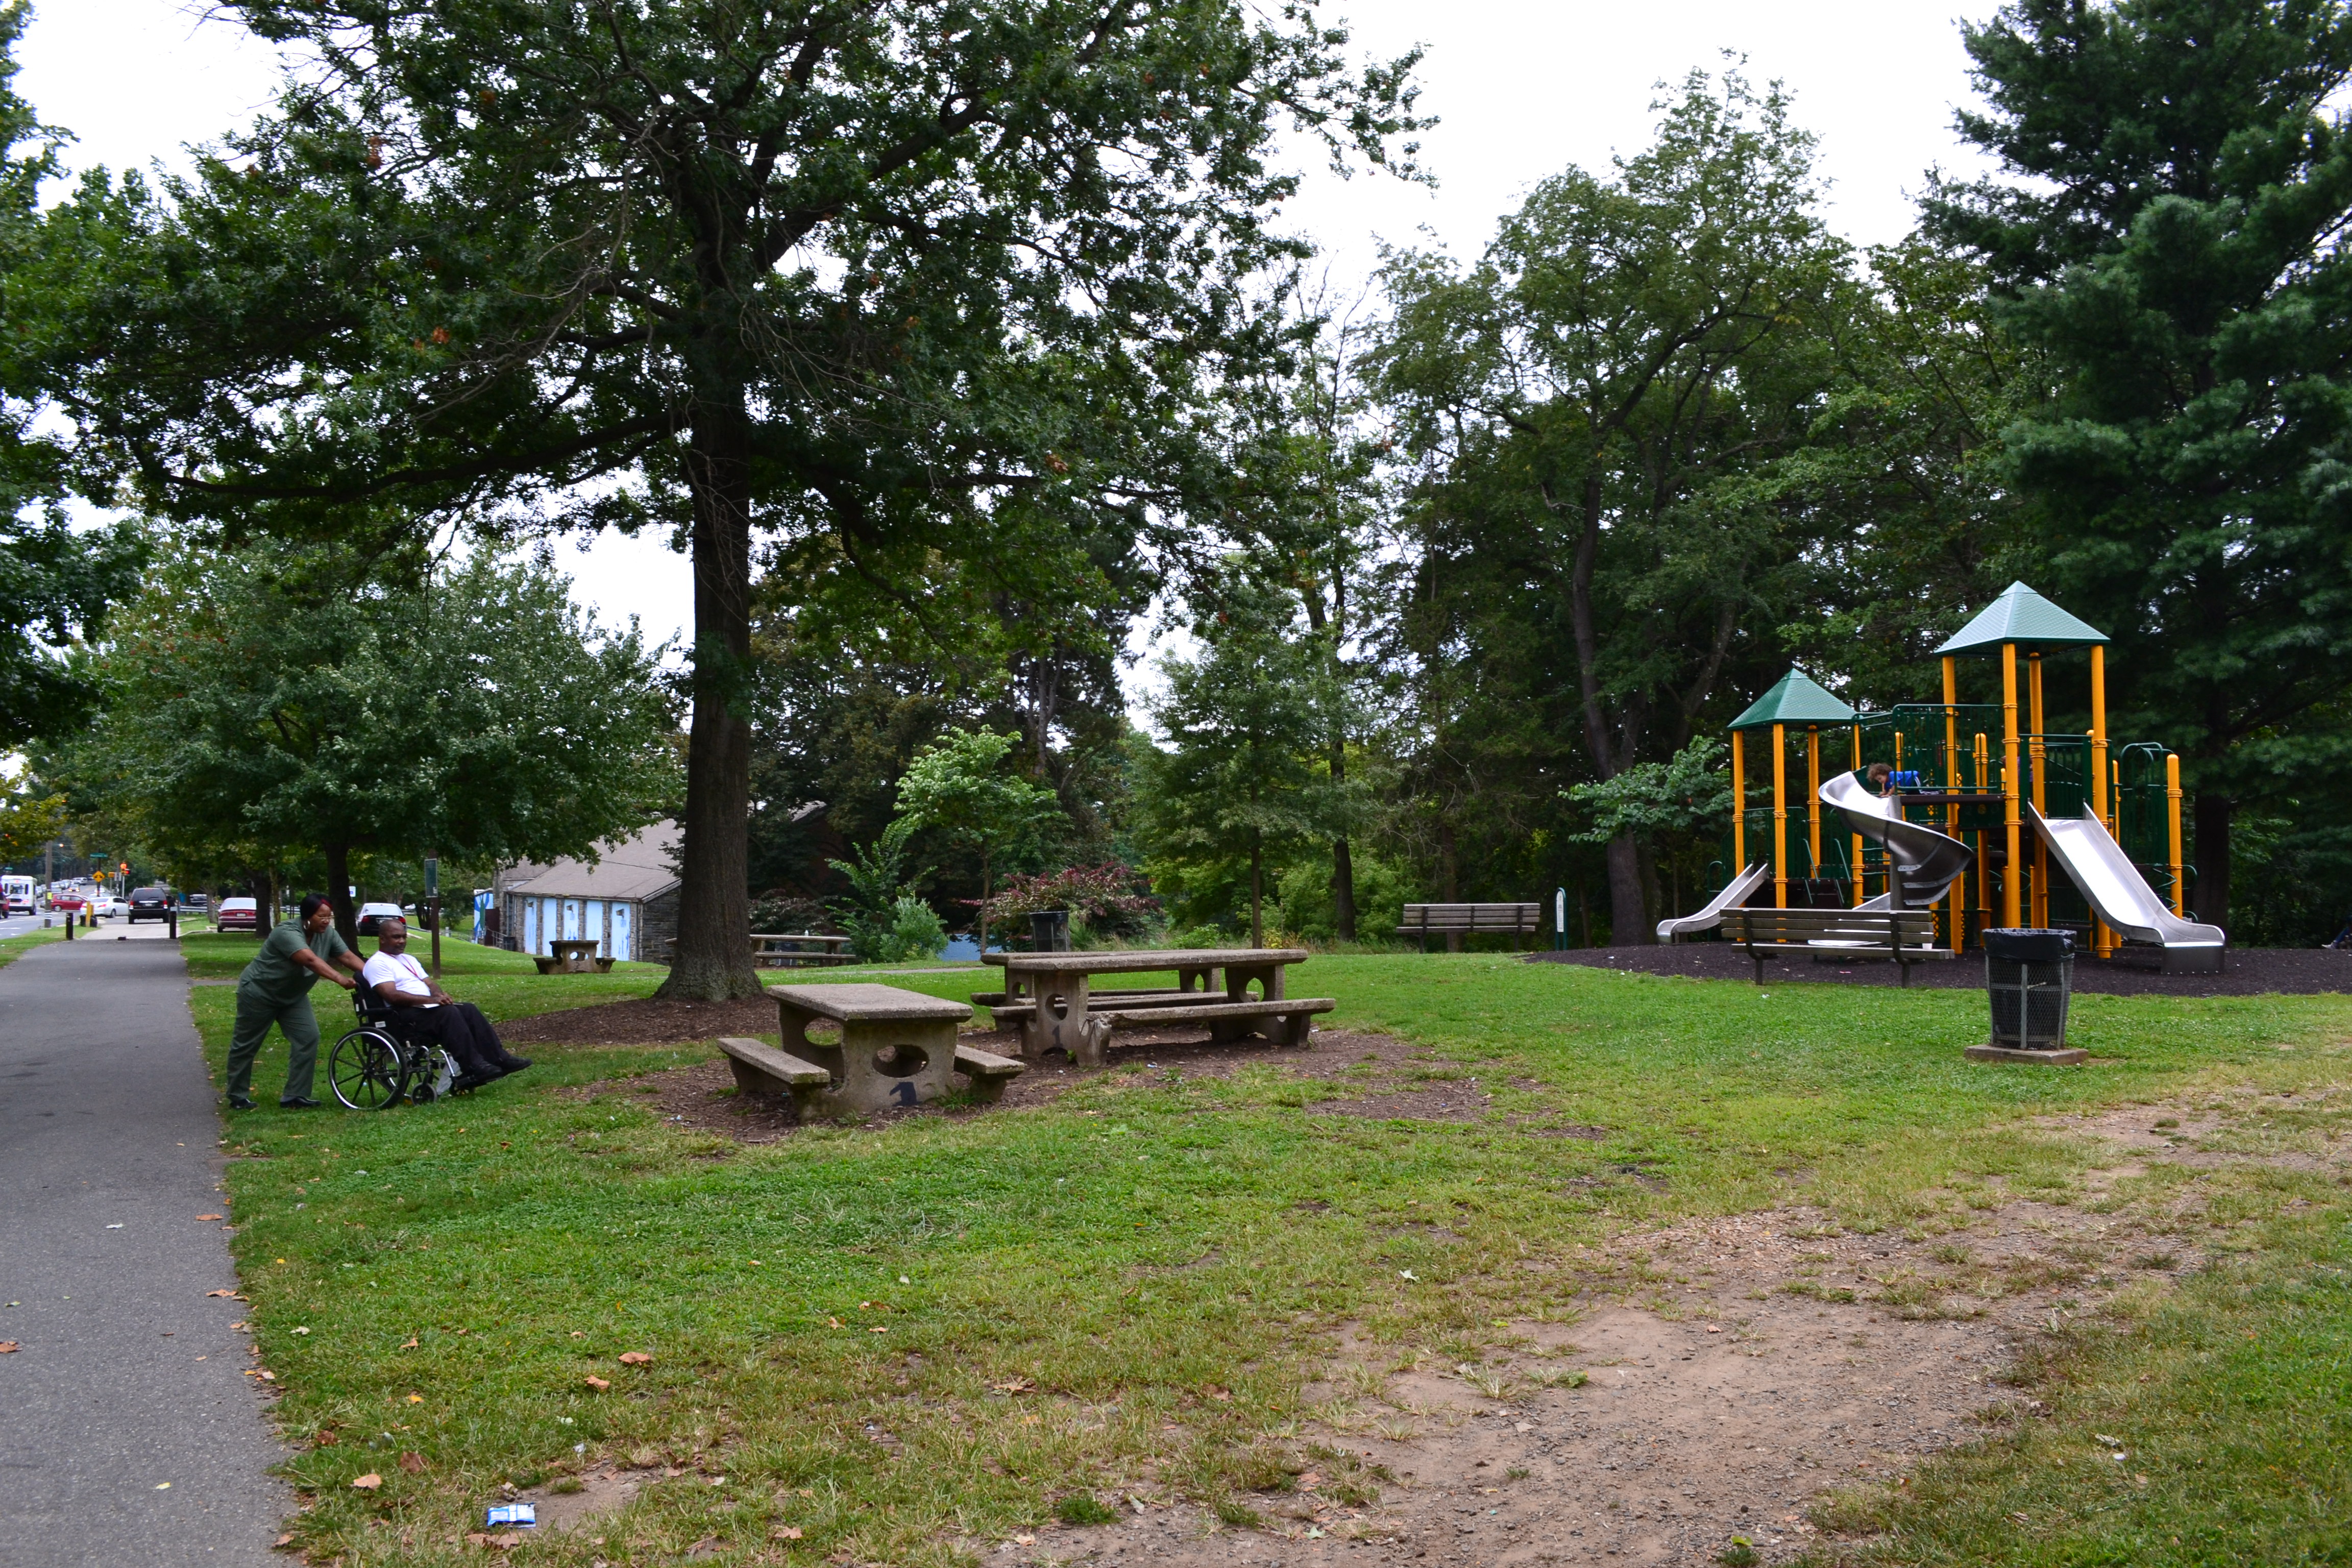 The trail passes multiple playgrounds, tennis courts, the Cobbs Creek Community Environmental Center and more